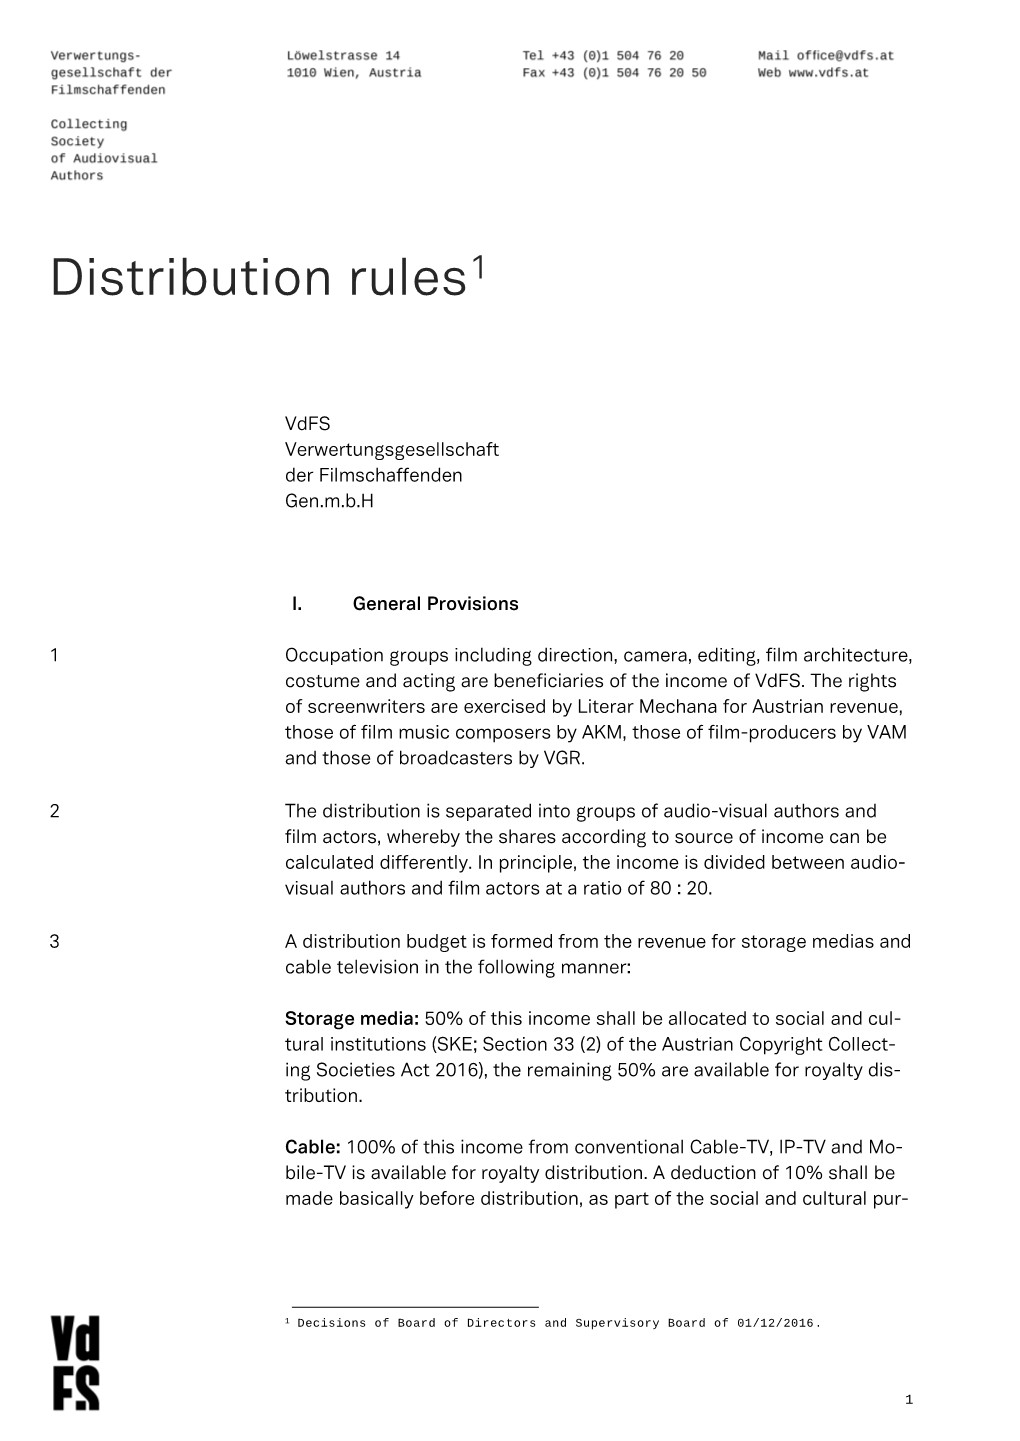 Distribution Rules 2018